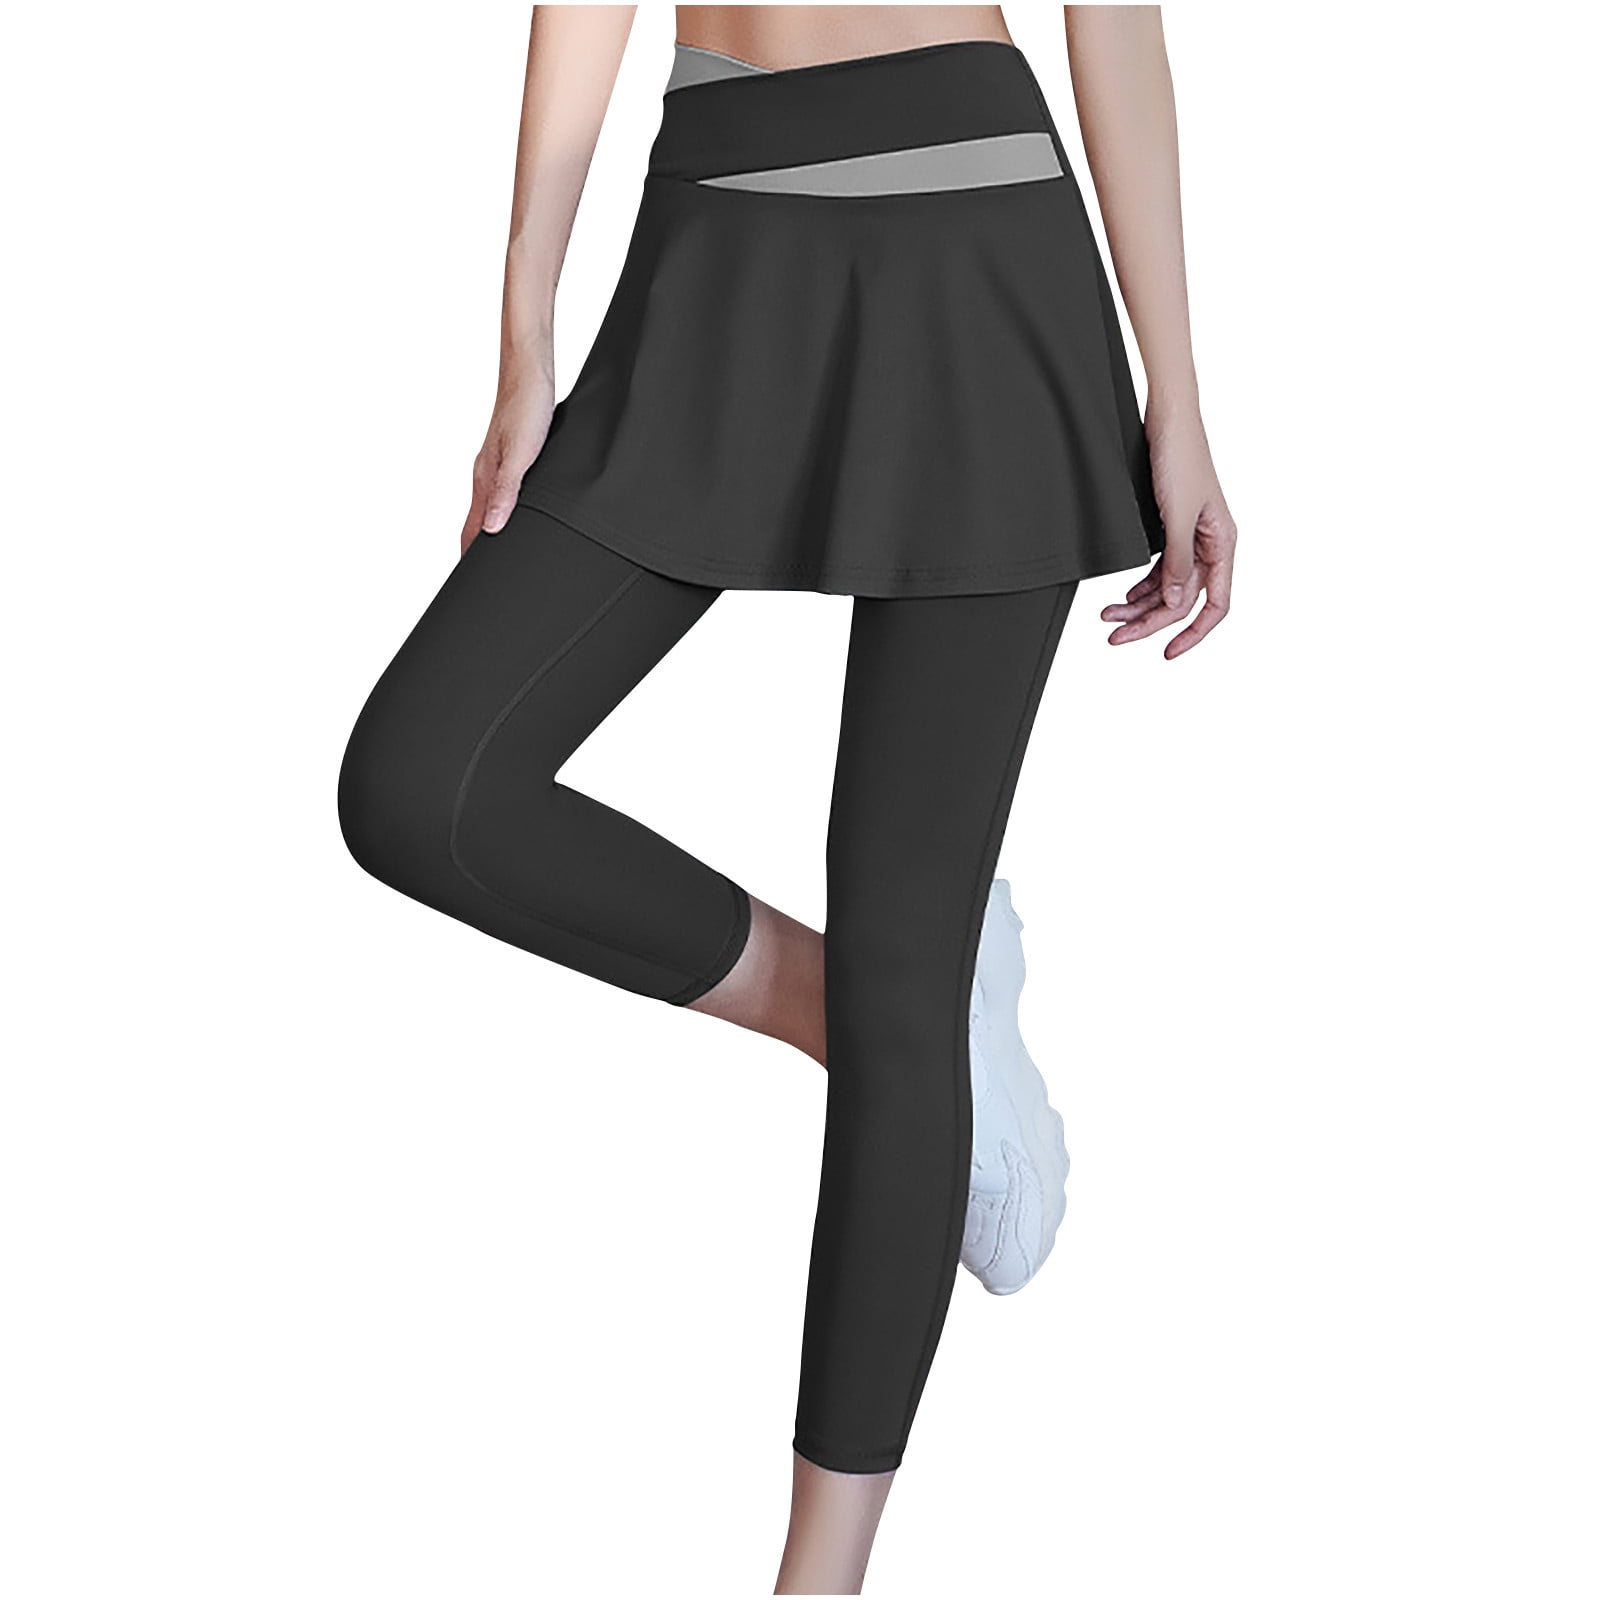 JWZUY Yoga Skirted Leggings with Pockets Women Active Athletic Ruffle  Pleated Golf Tennis Color Block Skirt Pants Black XXL 